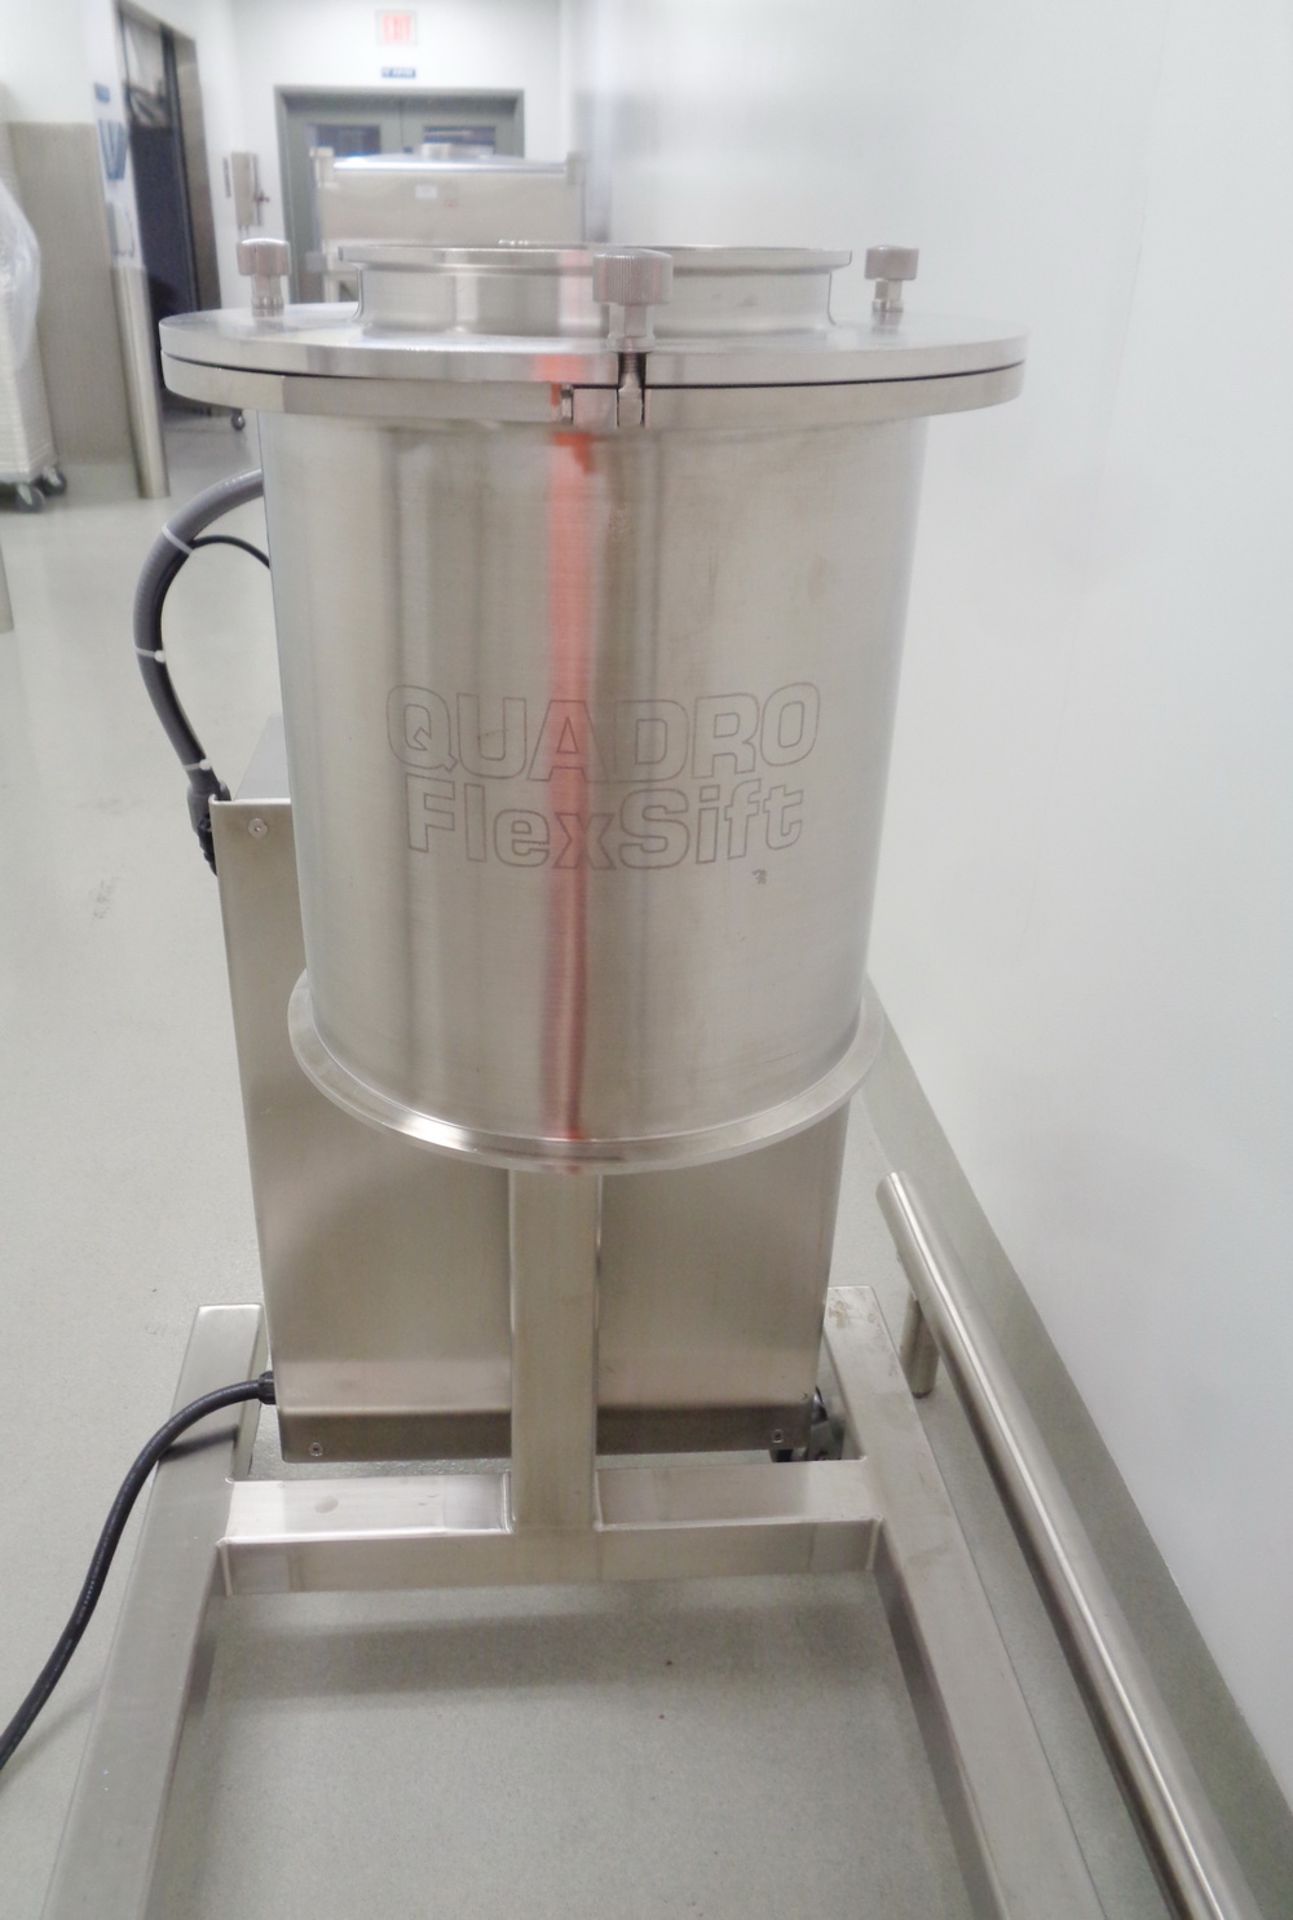 Quadro Stainless Steel Portable Sifter, Model S20, S/N 0041R - Image 3 of 7